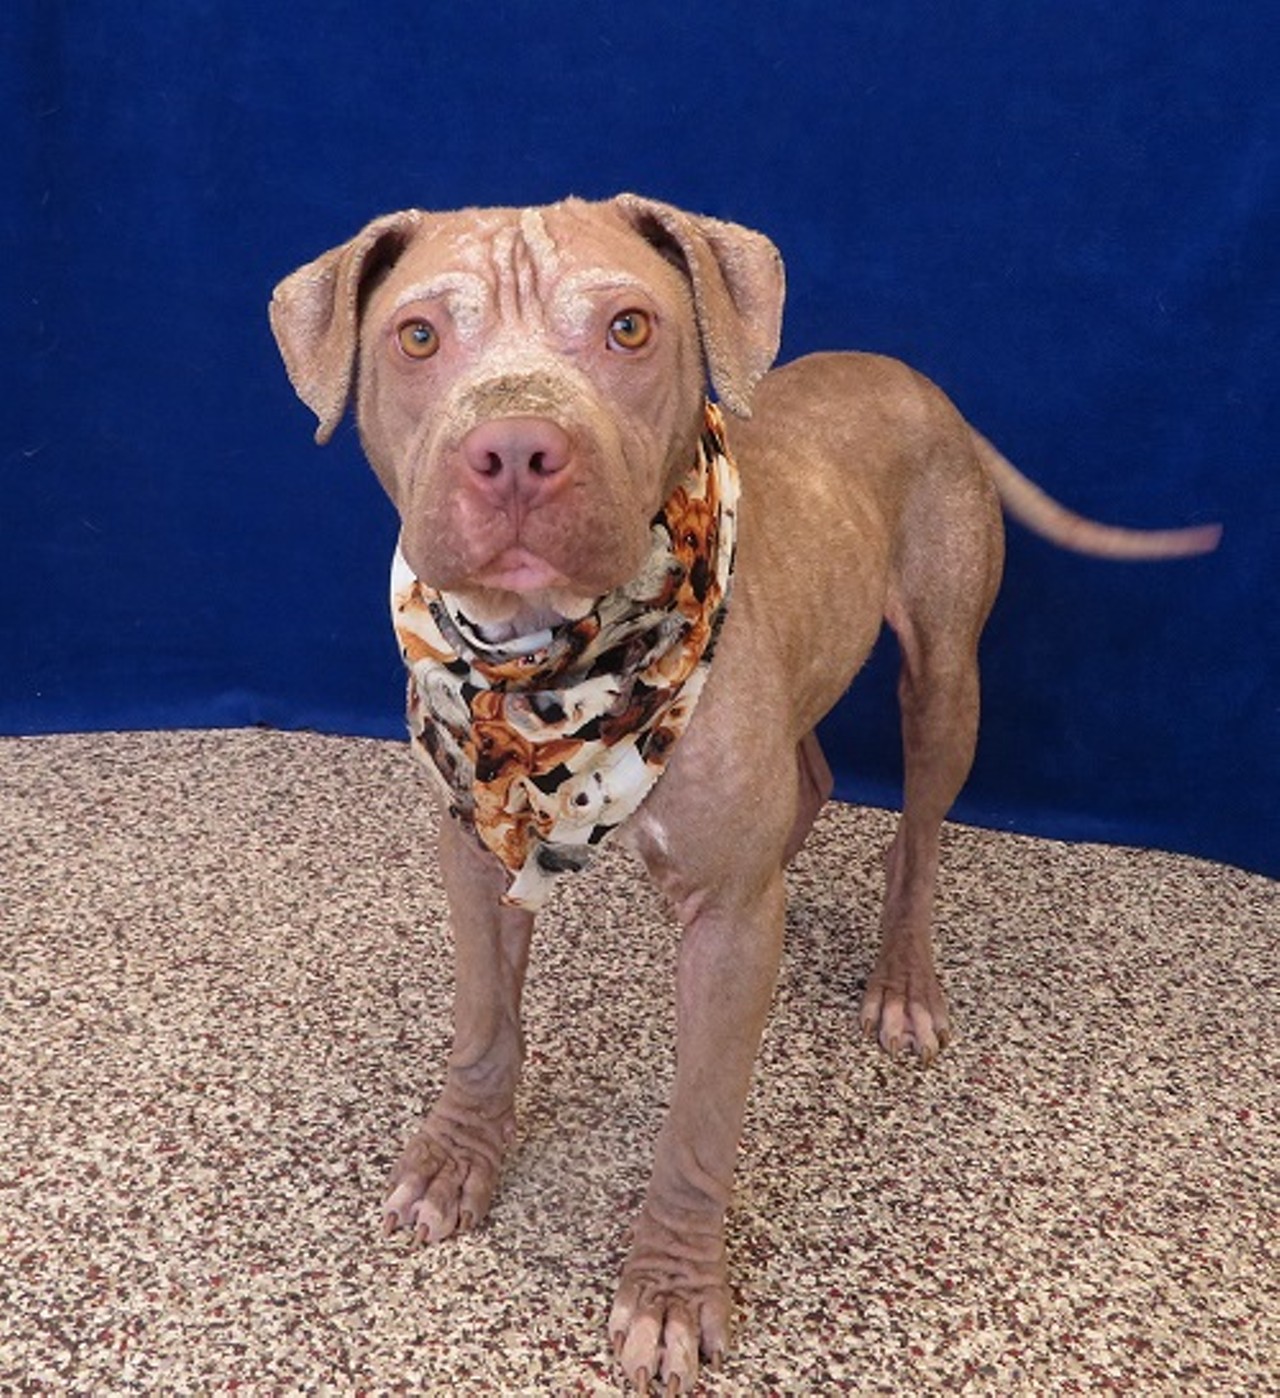 NAME: Biscuit
GENDER: Male
BREED: Pit Bull Terrier
AGE: 10 months
WEIGHT: 40 pounds
SPECIAL CONSIDERATIONS: Recovering from noncontagious skin ailment
REASON I CAME TO MHS: Homeless in Detroit
LOCATION: Mackey Center for Animal Care in Detroit
ID NUMBER: 865072